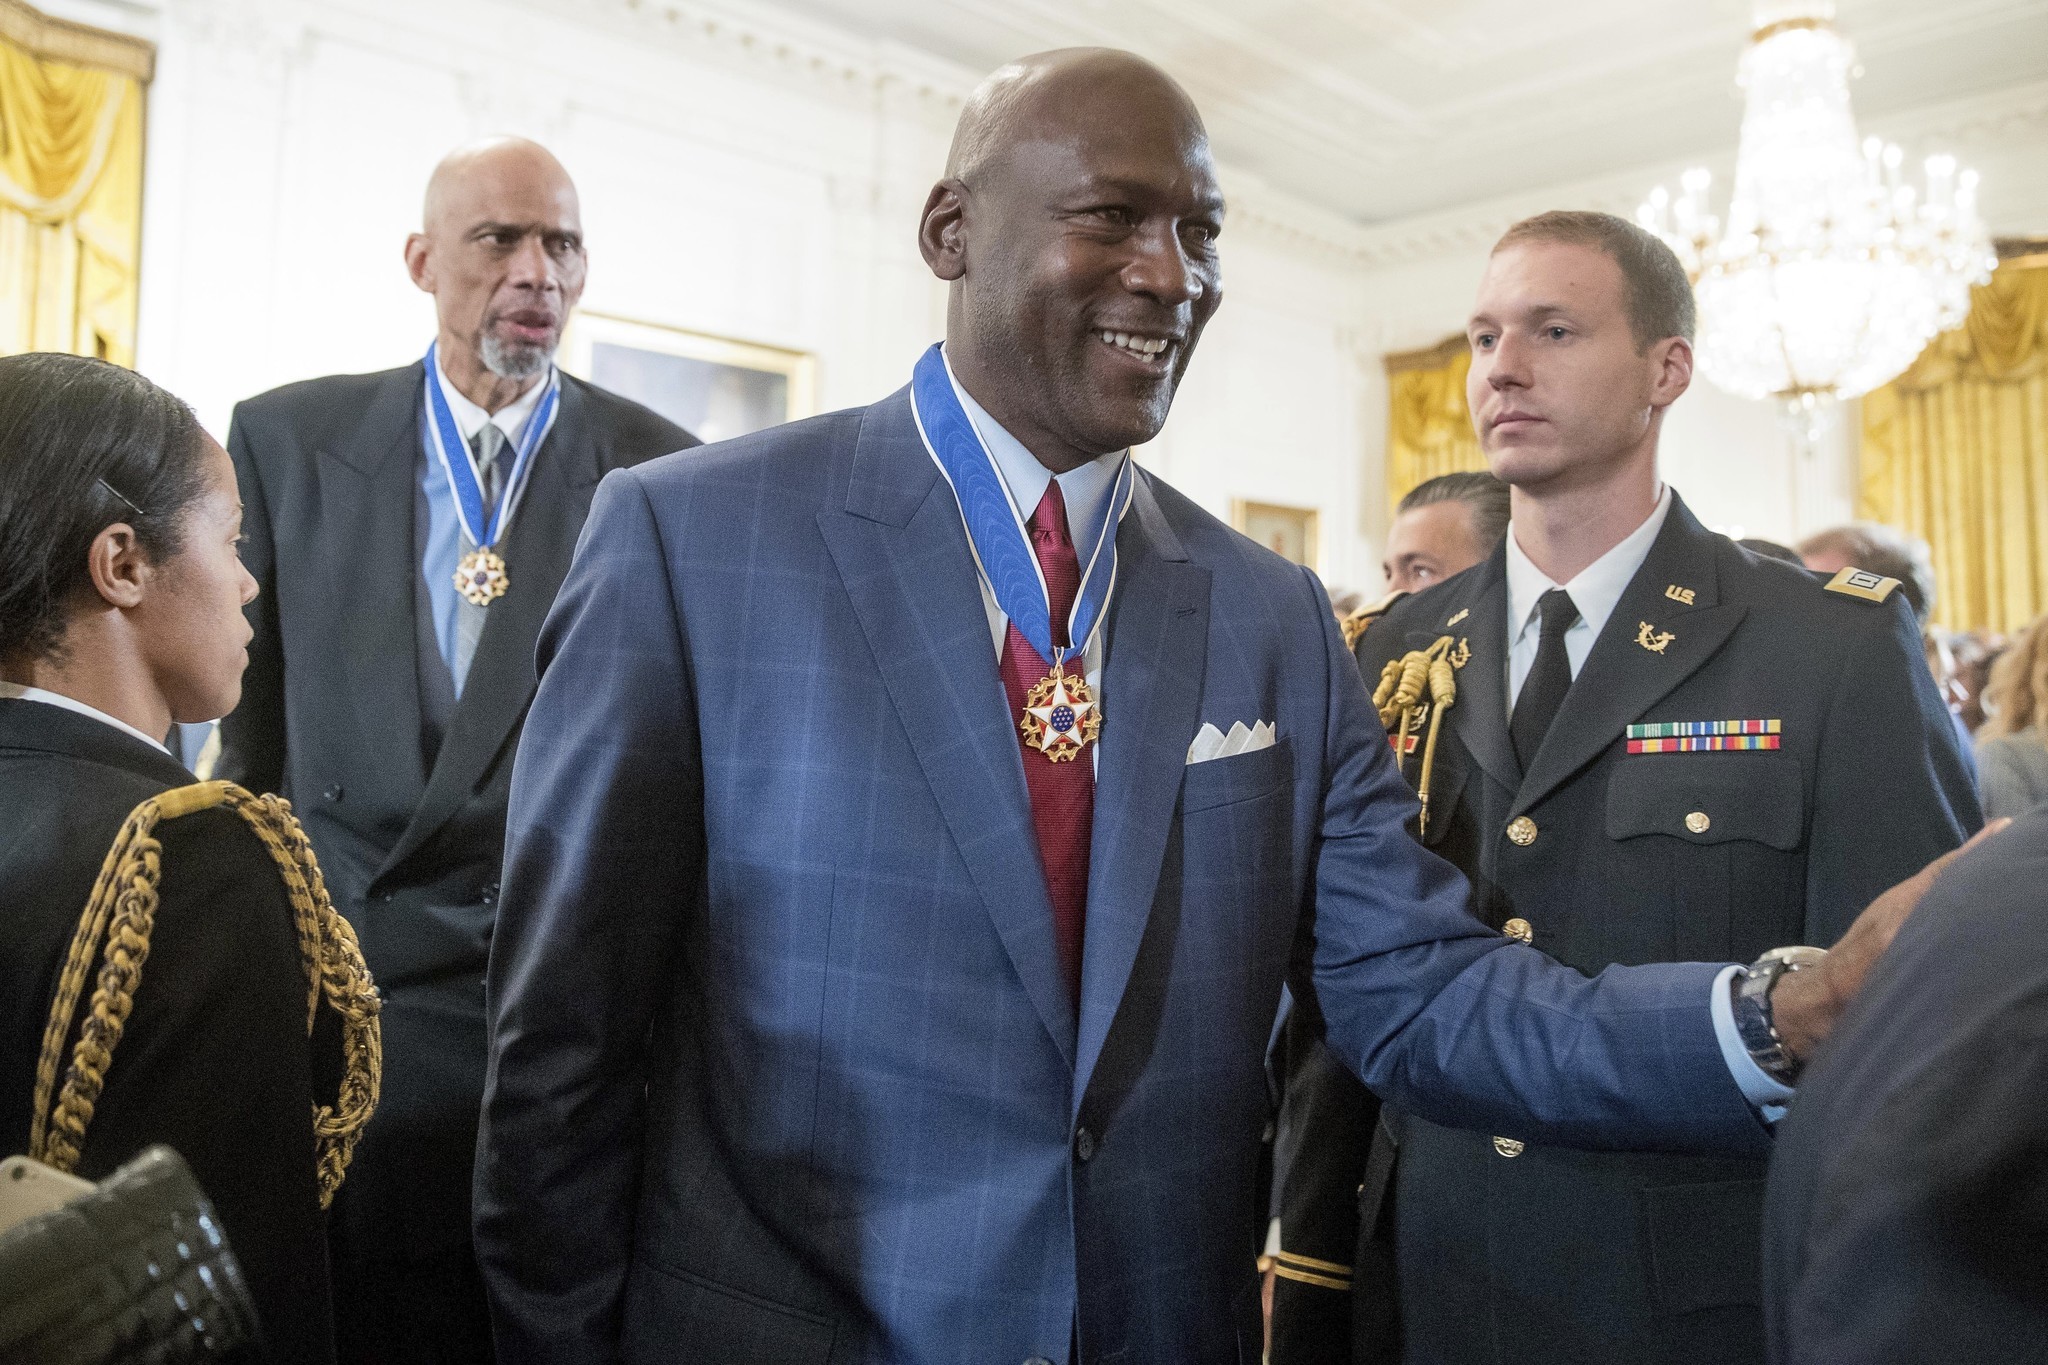 Michael Jordan voices support for freedom of speech and peaceful protest - Chicago Tribune2048 x 1365